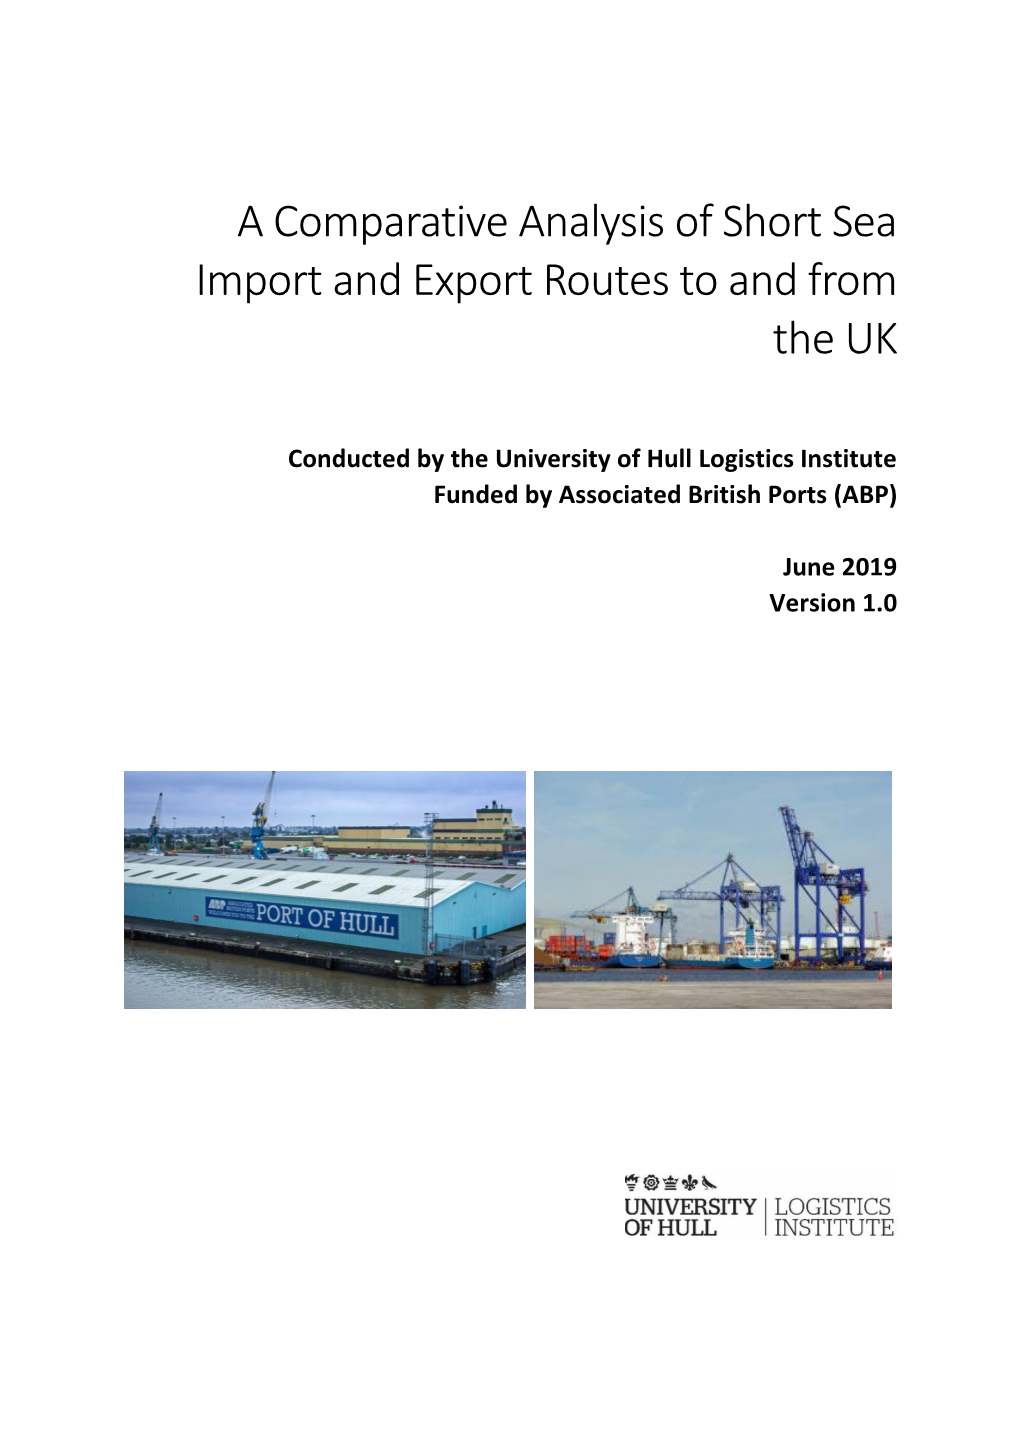 A Comparative Analysis of Short Sea Import and Export Routes to and from the UK